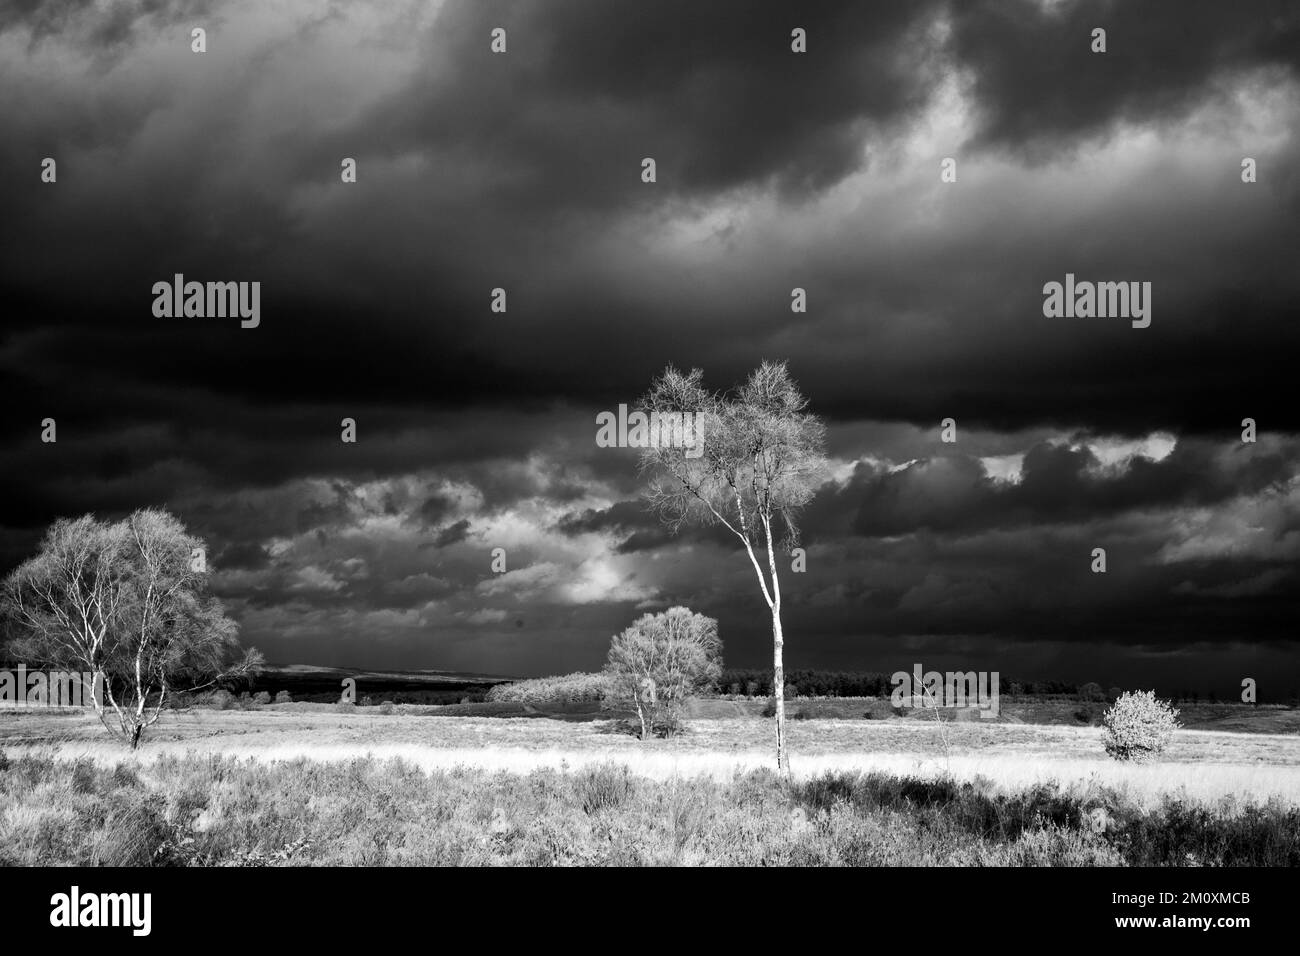 Black and white photograph with stormy sky in winter over heathland on Cannock Chase AONB Area of Outstanding Natural Beauty in Staffordshire England Stock Photo